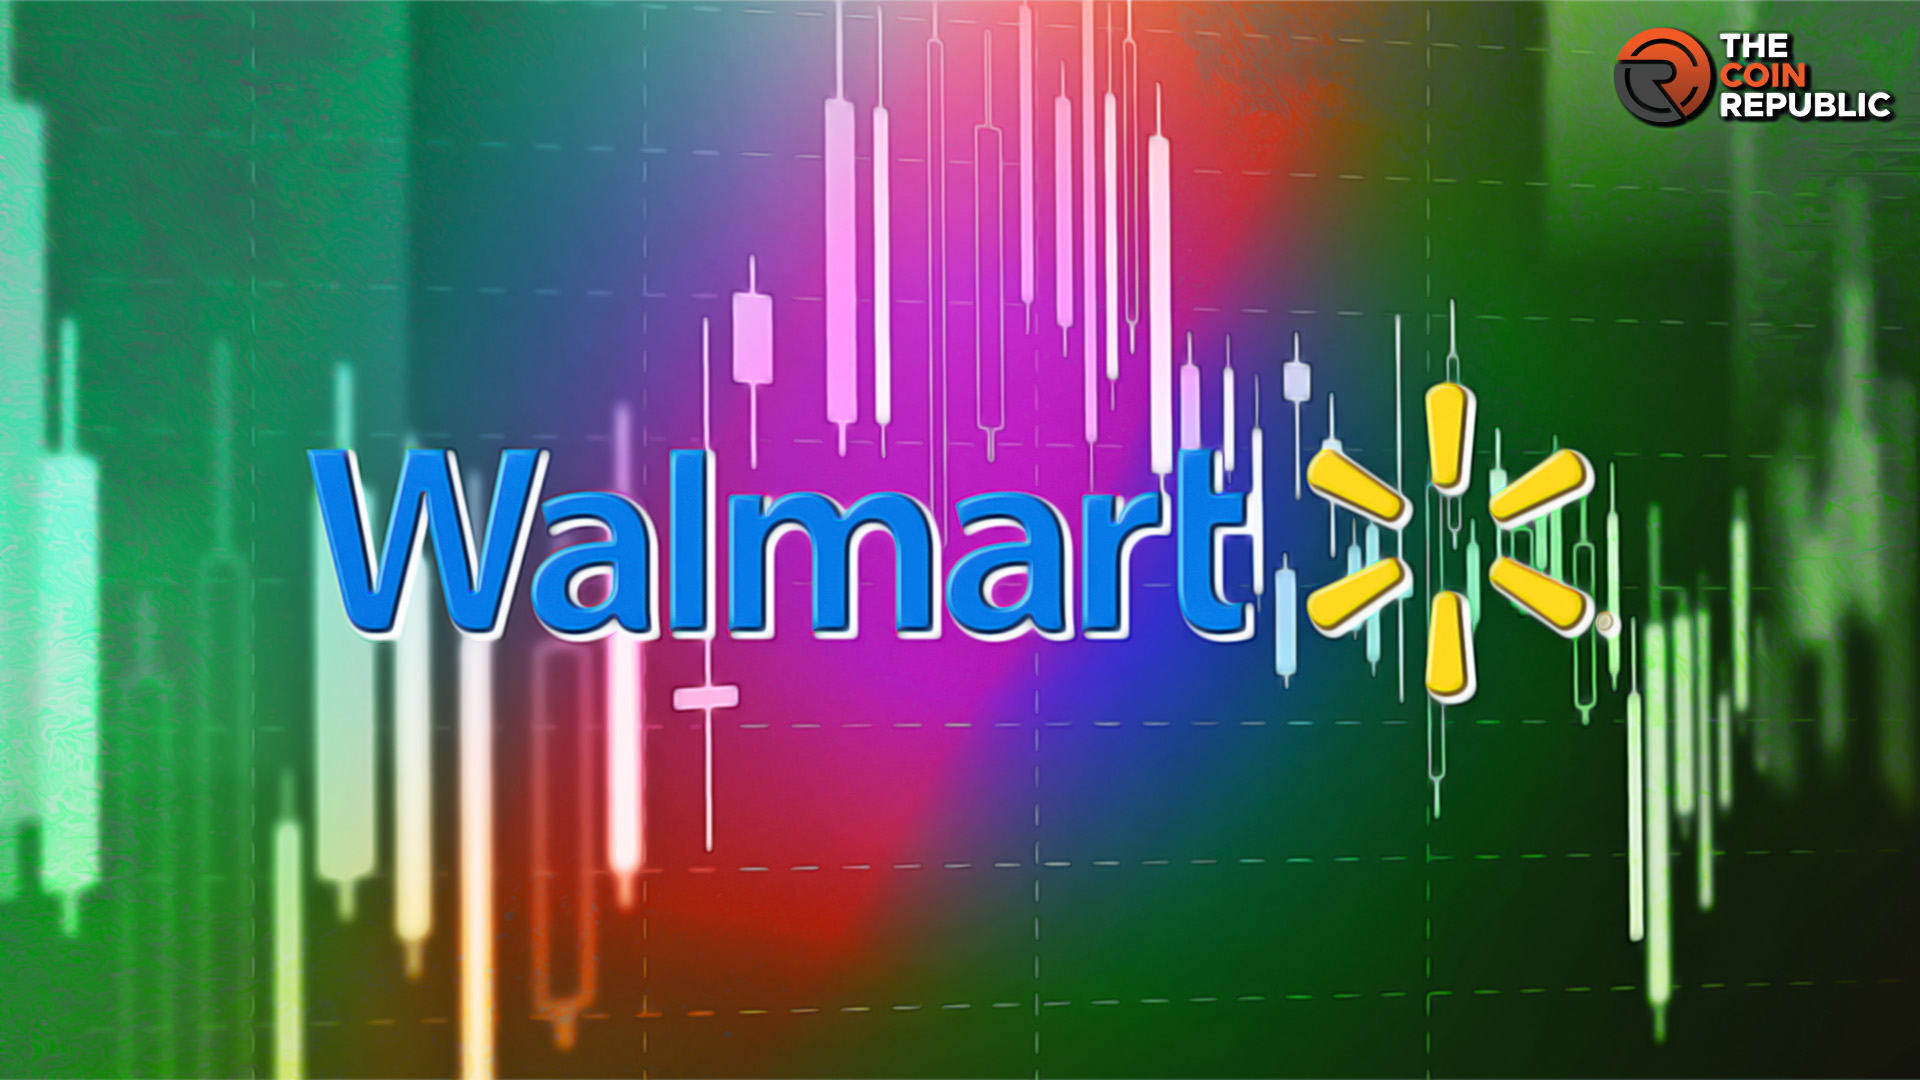 Will Walmart (WMT) Stock Price Mark Record High of $162 Again?